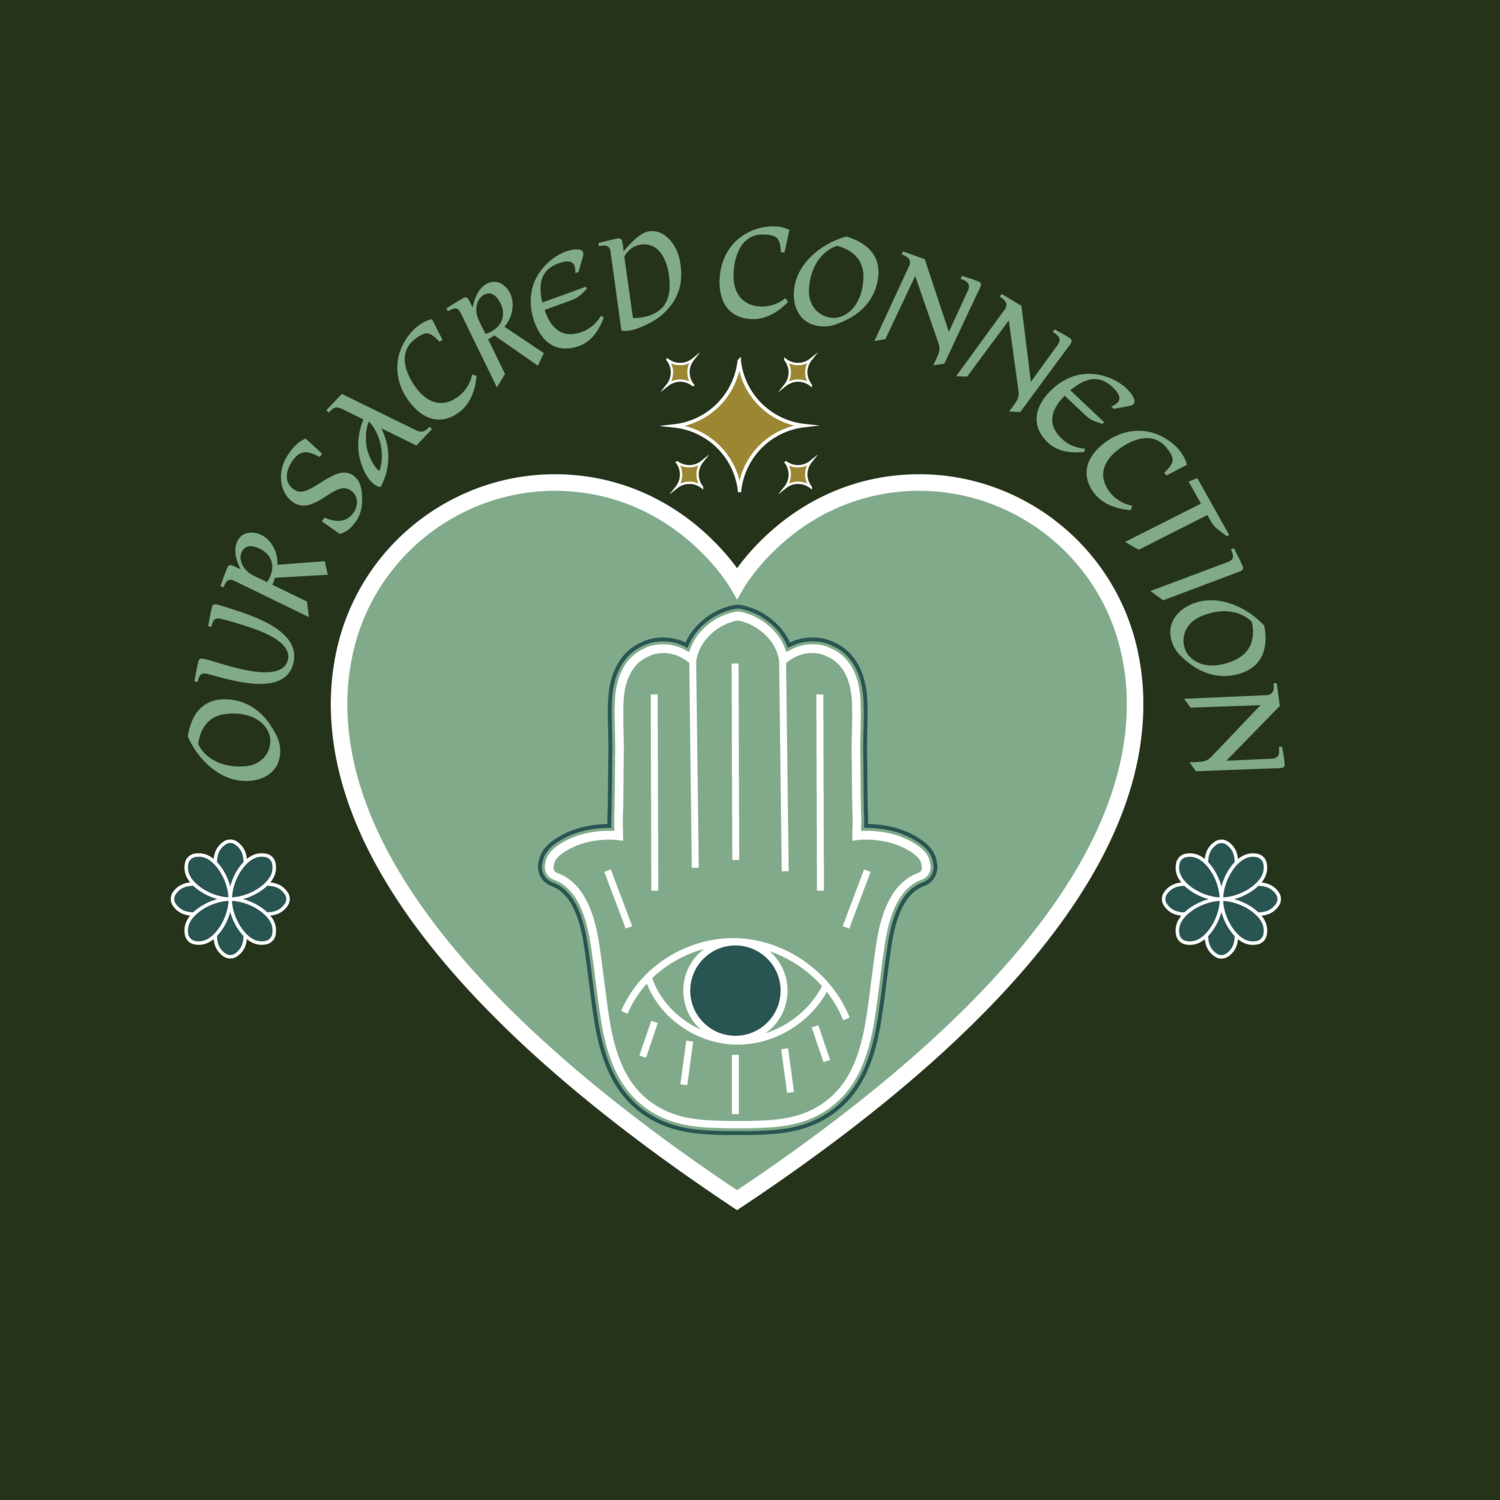 Our Sacred Connection